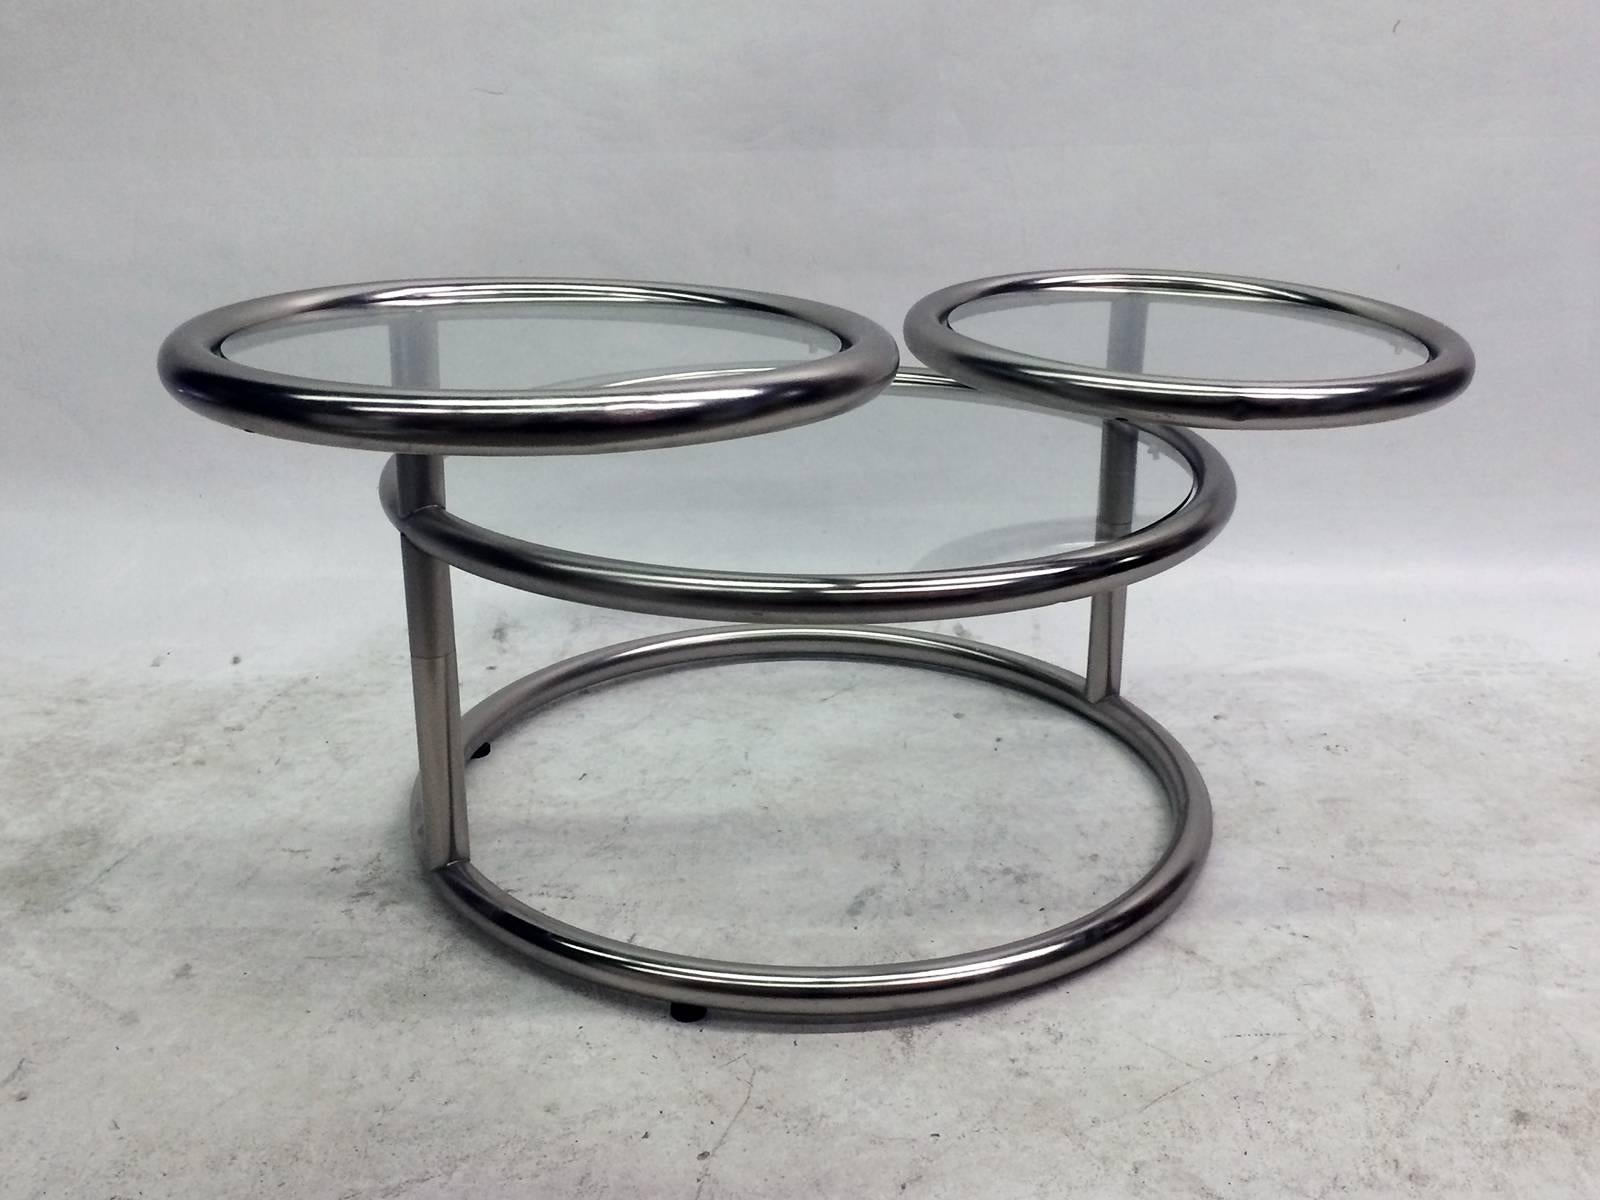 This coffee table features three tubular chrome and glass surfaces. The two top ones both swivel independently allowing the table to expand in size.